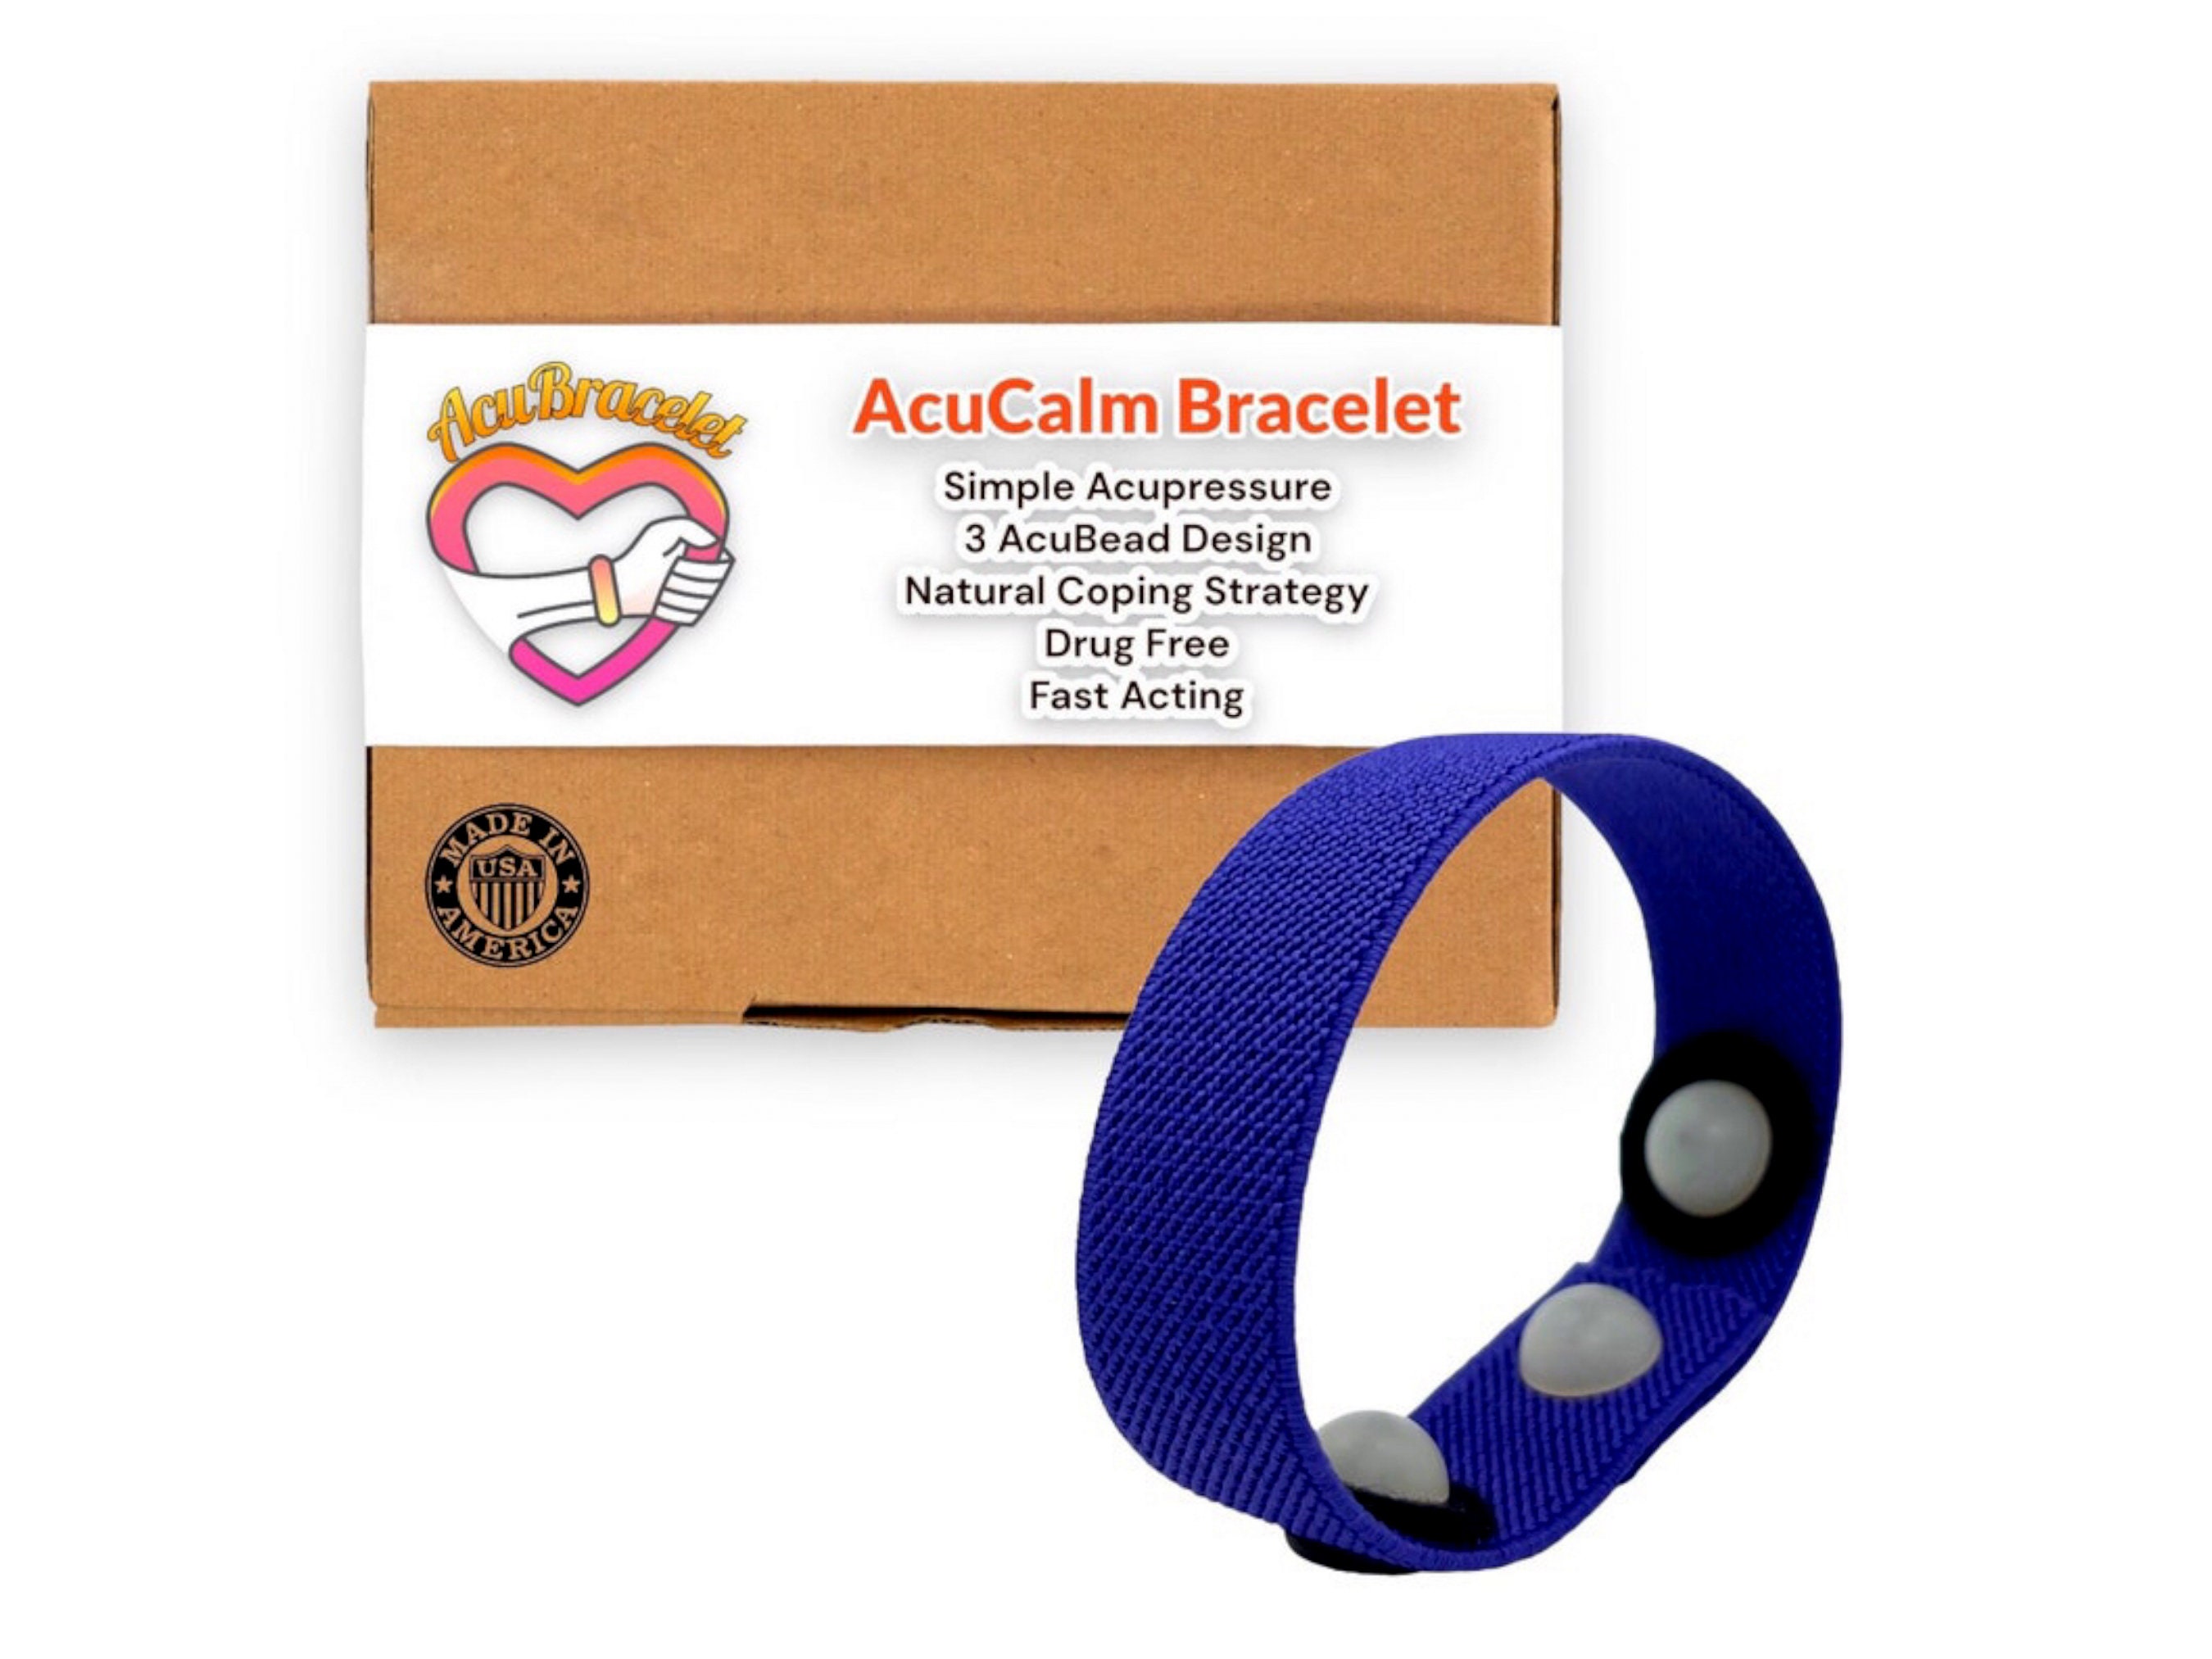 AcuBracelet - Say goodbye to stress and hello to relaxation with our  Anti-Anxiety Bracelet 😌✨ This adjustable acupressure band promotes better  sleep and calms the mind 🌙 #AnxietyRelief #StressFree #SleepBetter  #NaturalRemedy #MentalWellness #